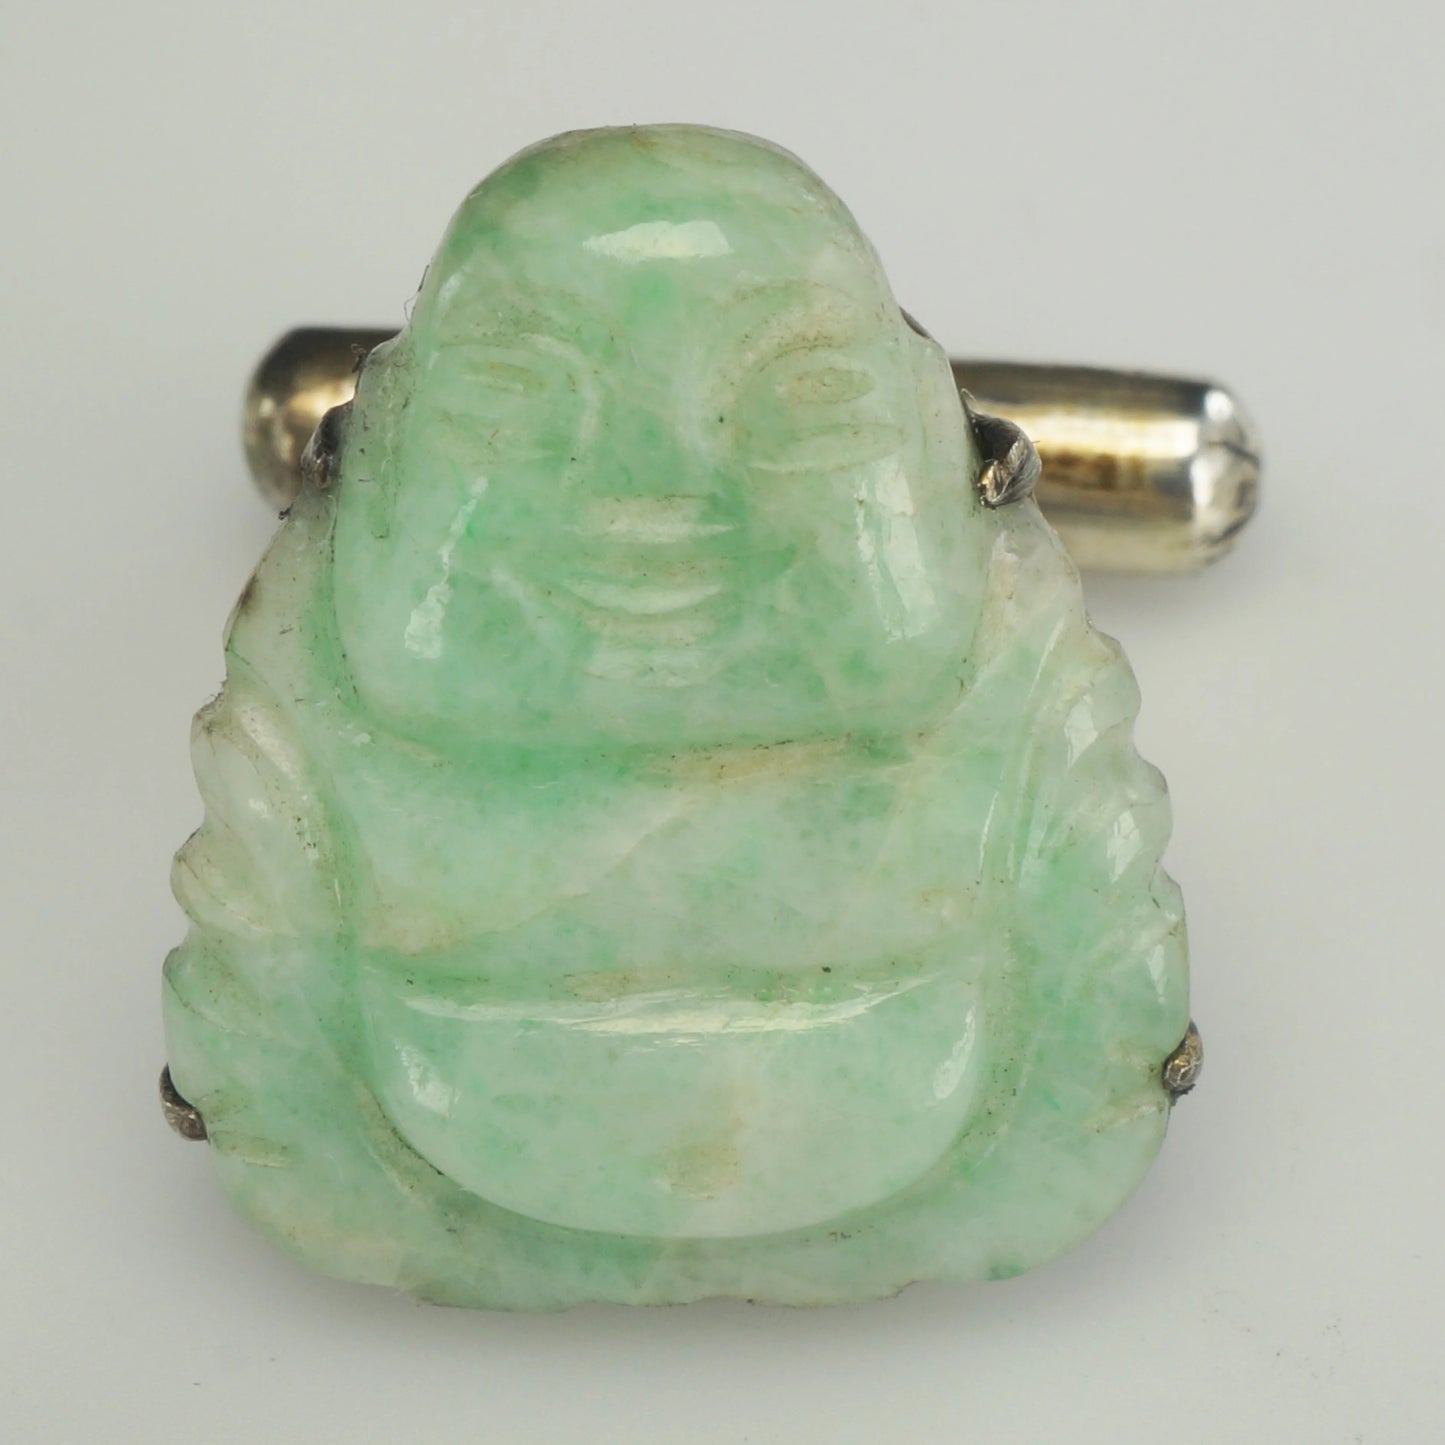 Vintage Chinese Carved Jadeite Happy Buddha Cufflinks - Bear and Raven Antiques